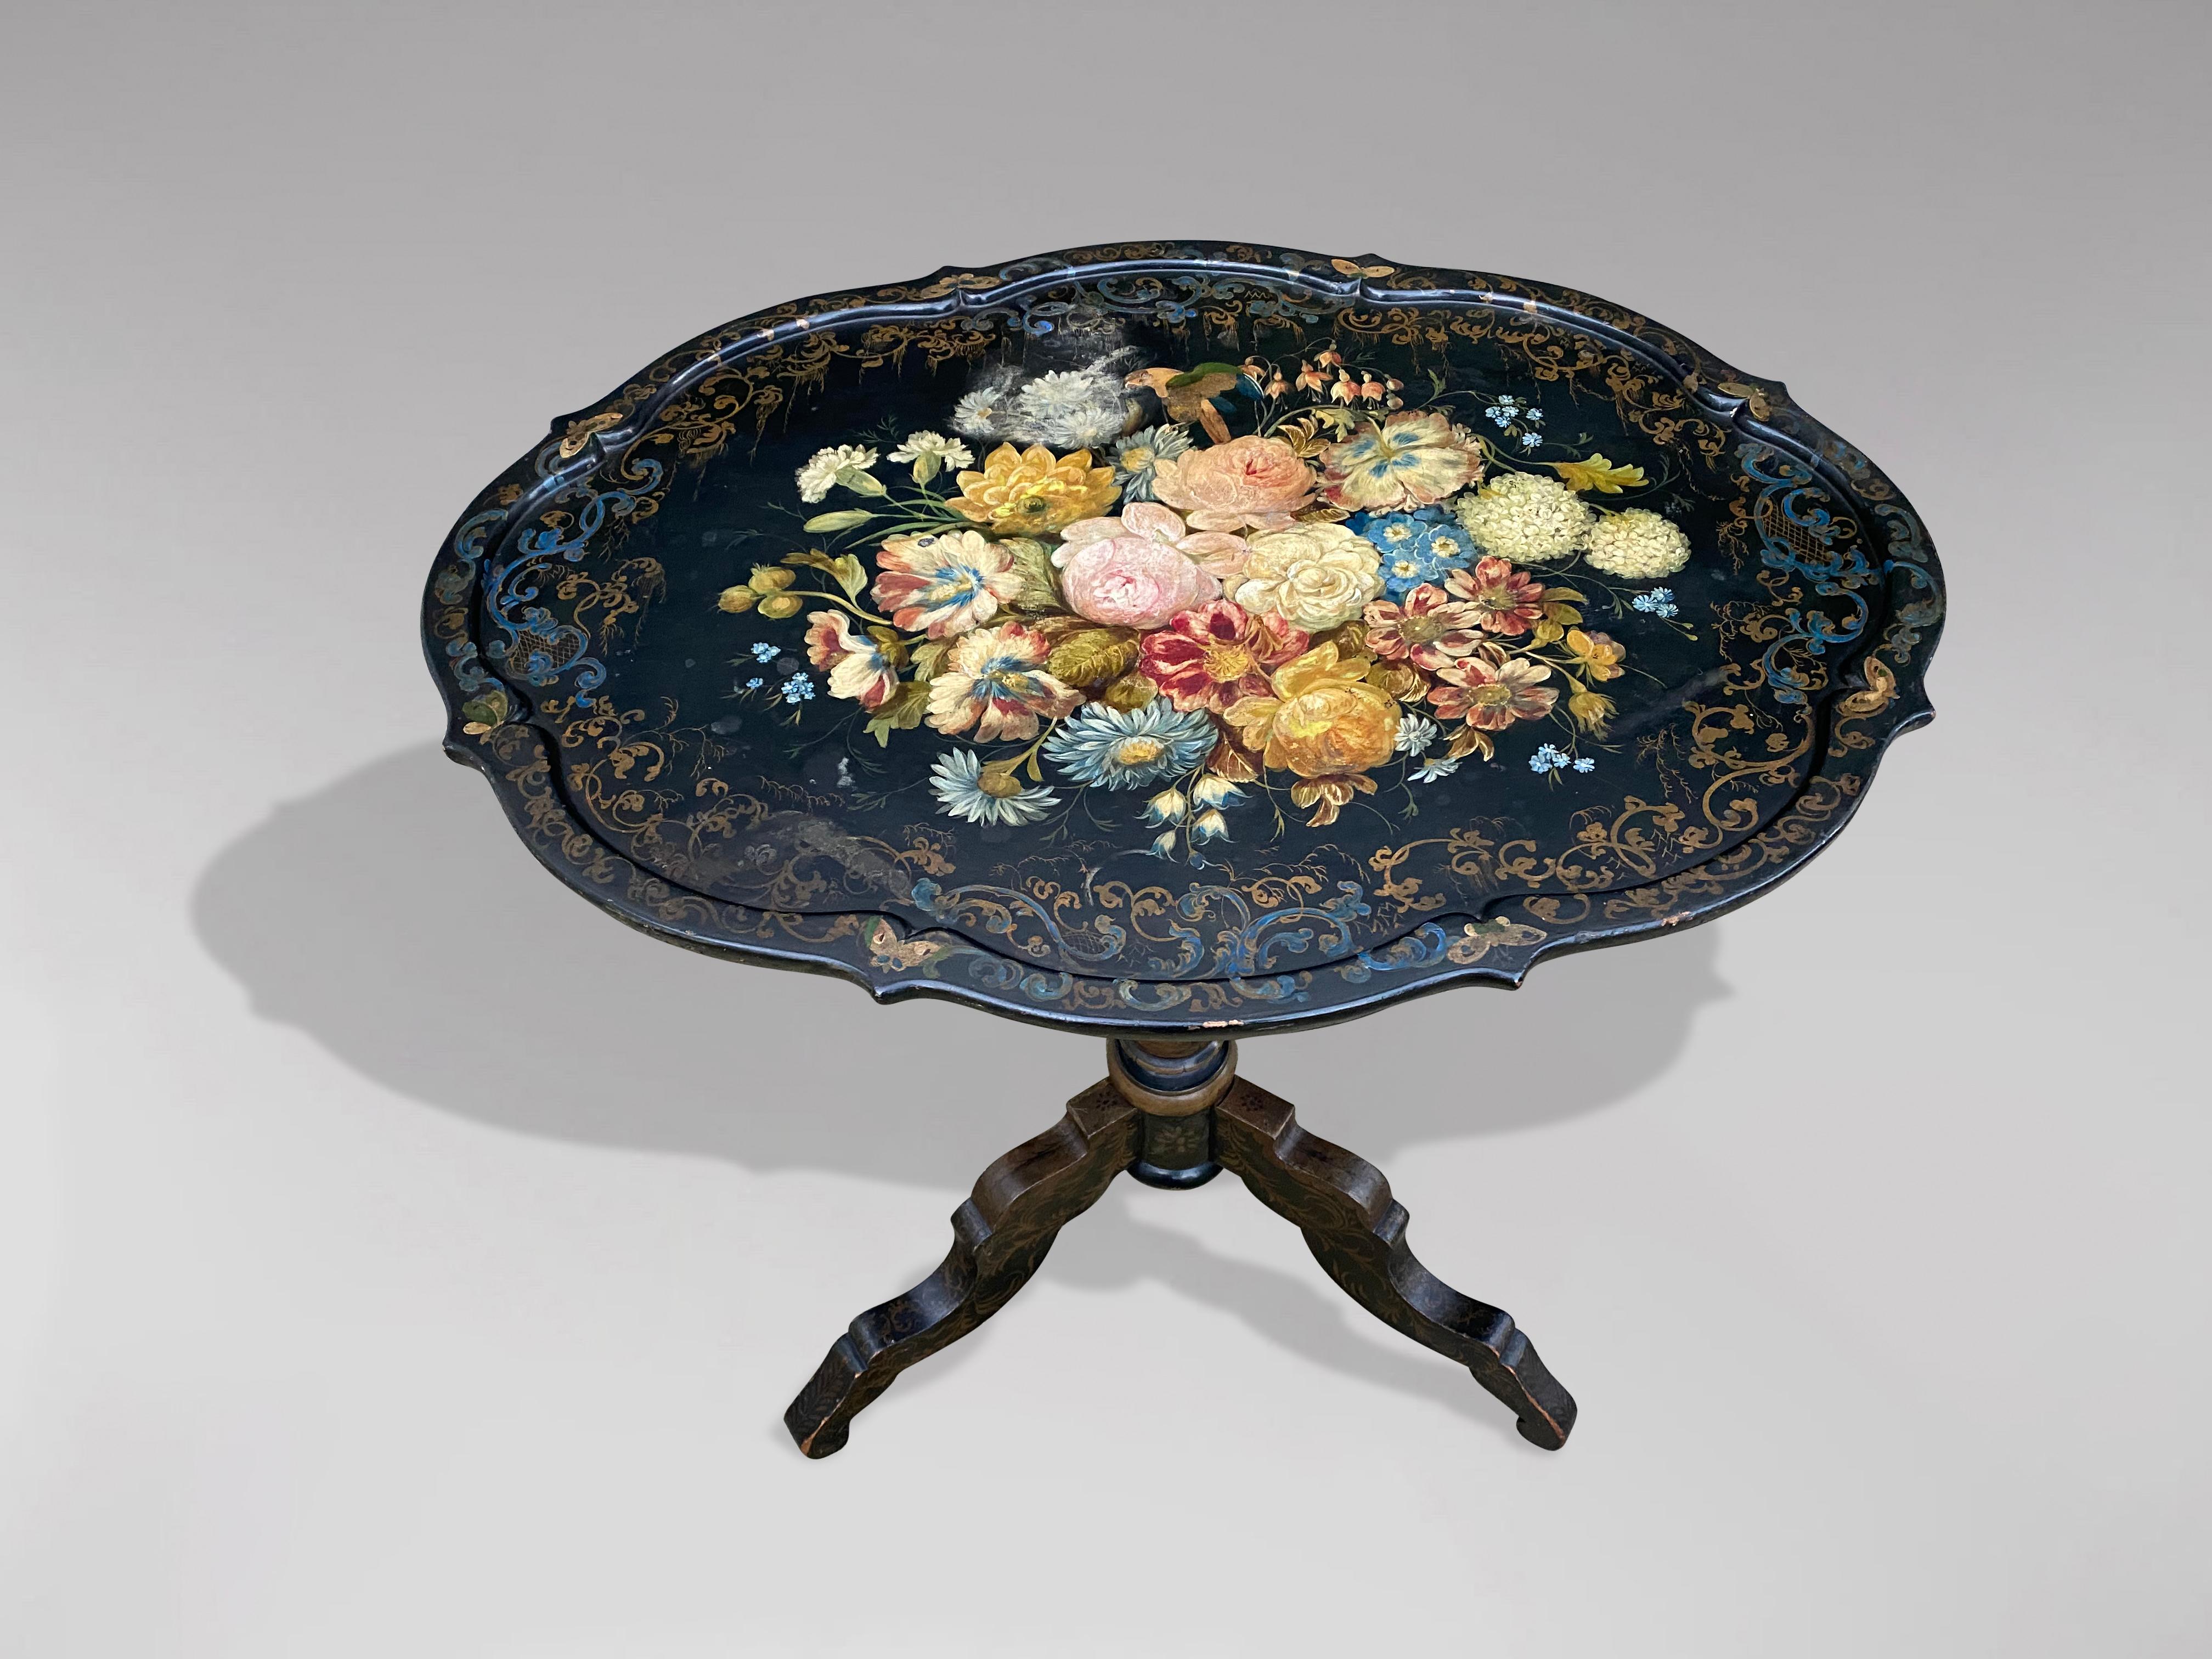 A stunning 19th century French Napoleon III ebonised and floral painted tilt-top gueridon table. With beautiful painted floral and gilt decoration to the shaped top and painted gilt decoration to the tripod base. Featuring its original brass lock